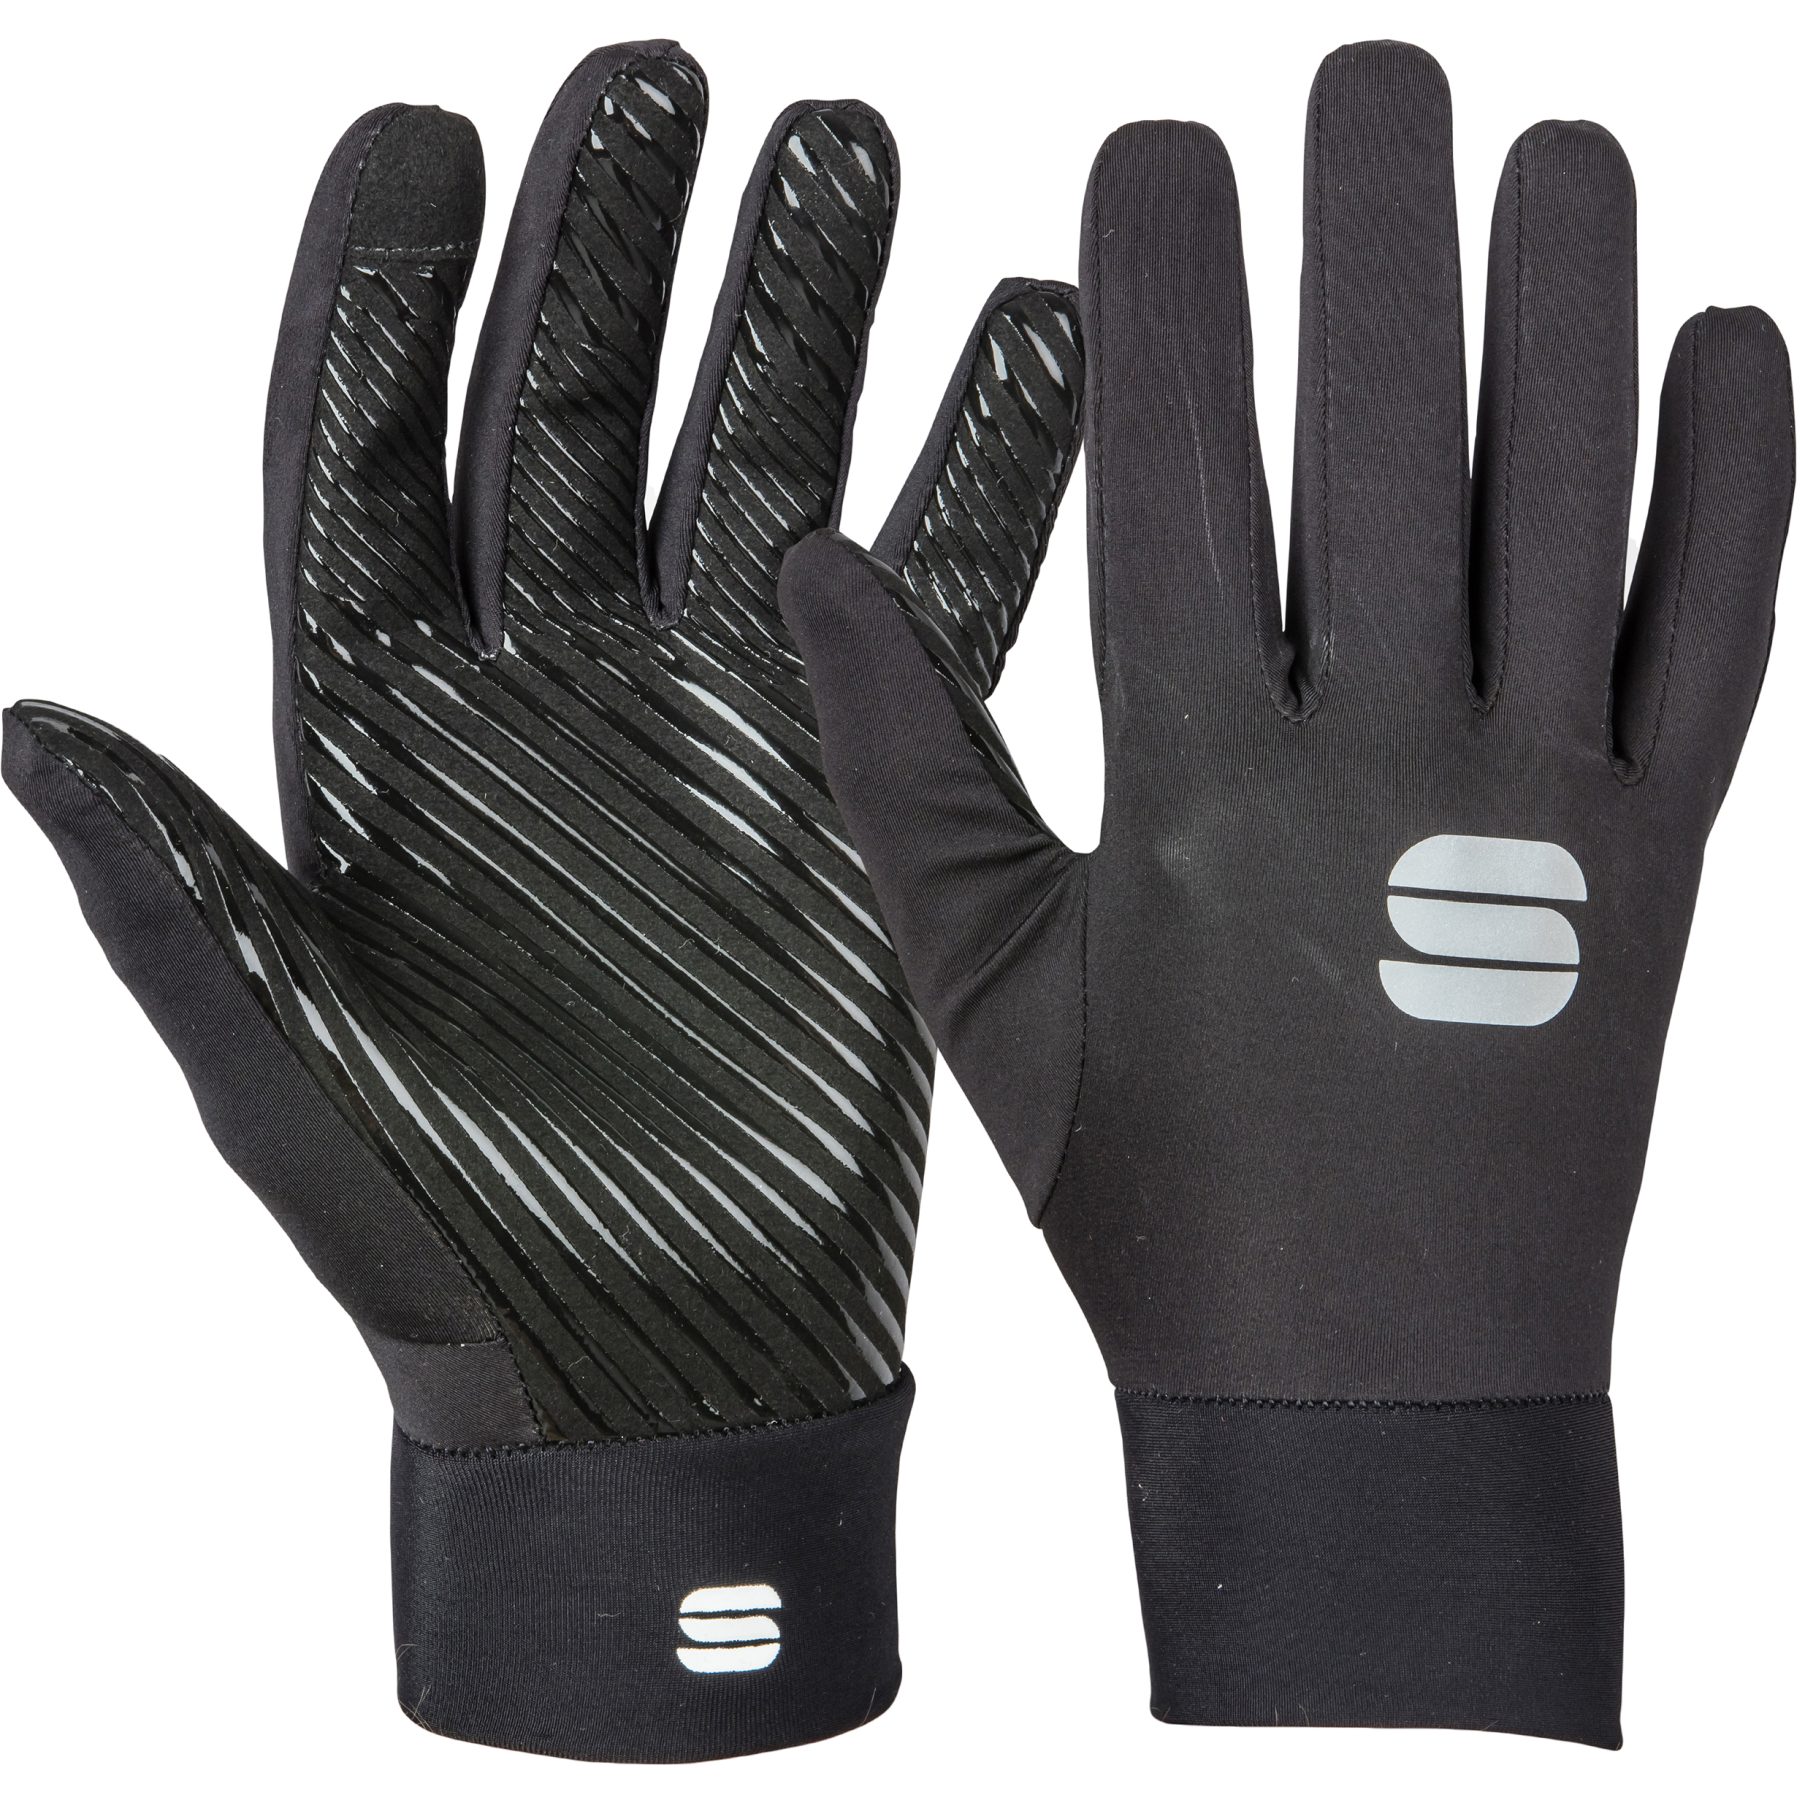 Picture of Sportful Fiandre Light Cycling Gloves - 002 Black